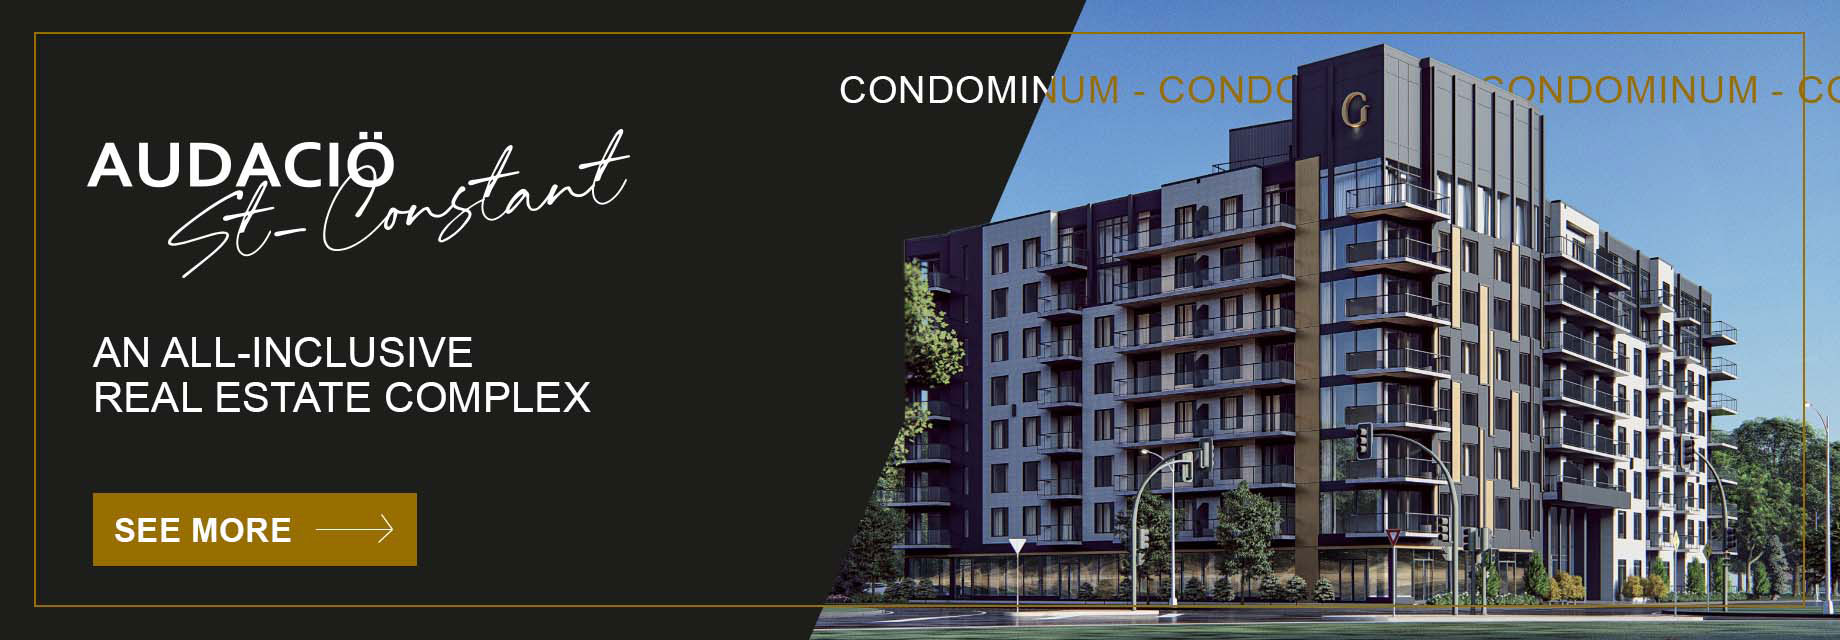 Audacio St-Constant offers rental condos inspired by art-deco design, located in the town of Saint-Constant.